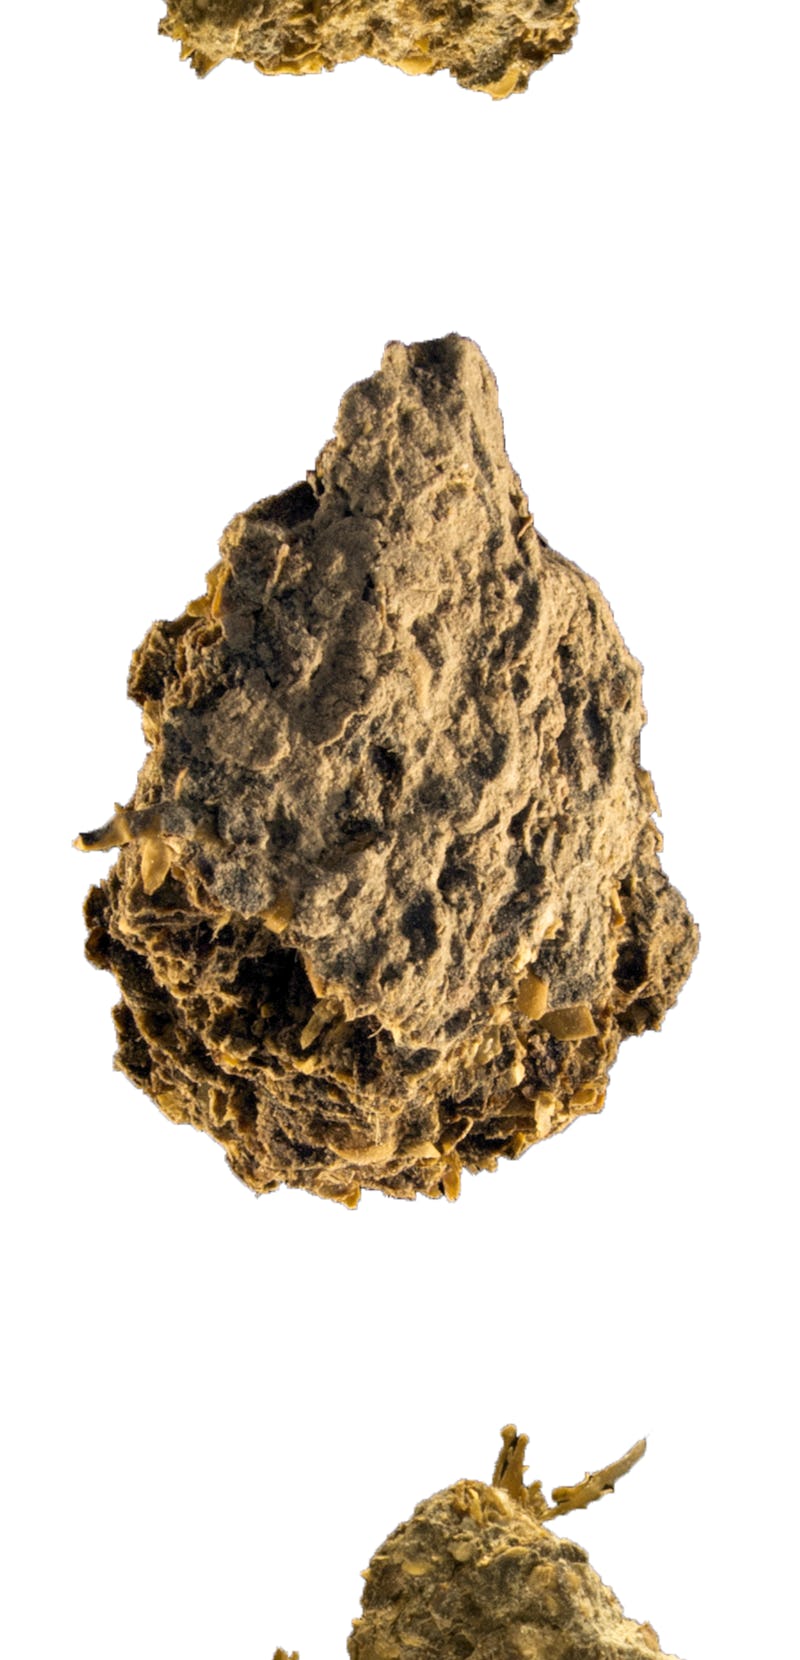 A fossilized poop